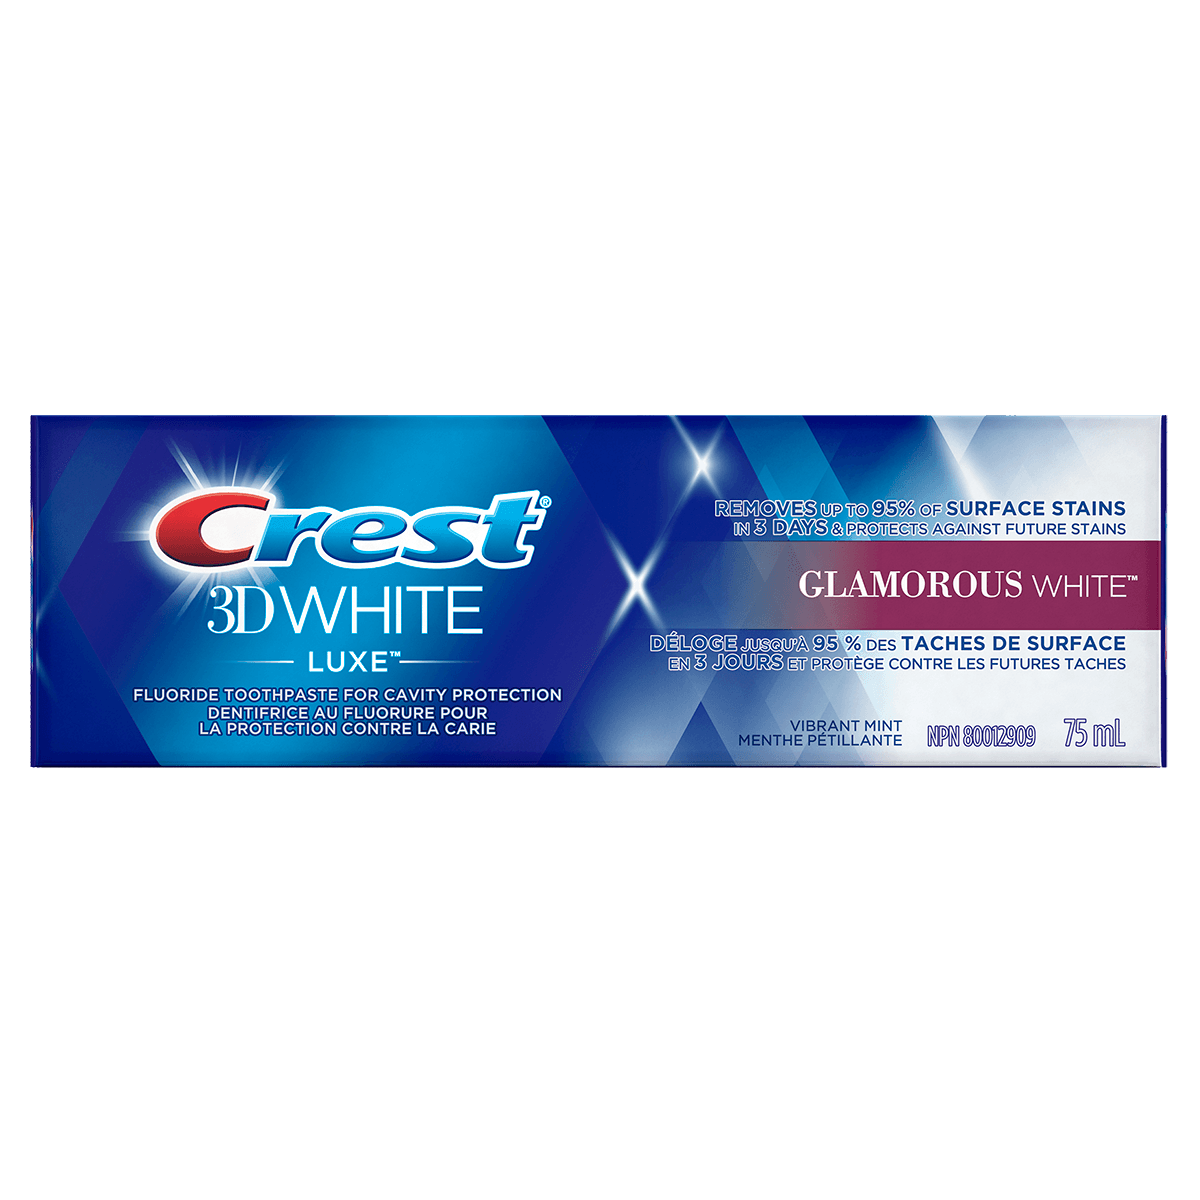 [EN]-Crest 3D White Glamorous White Toothpaste-Product Images Group-0